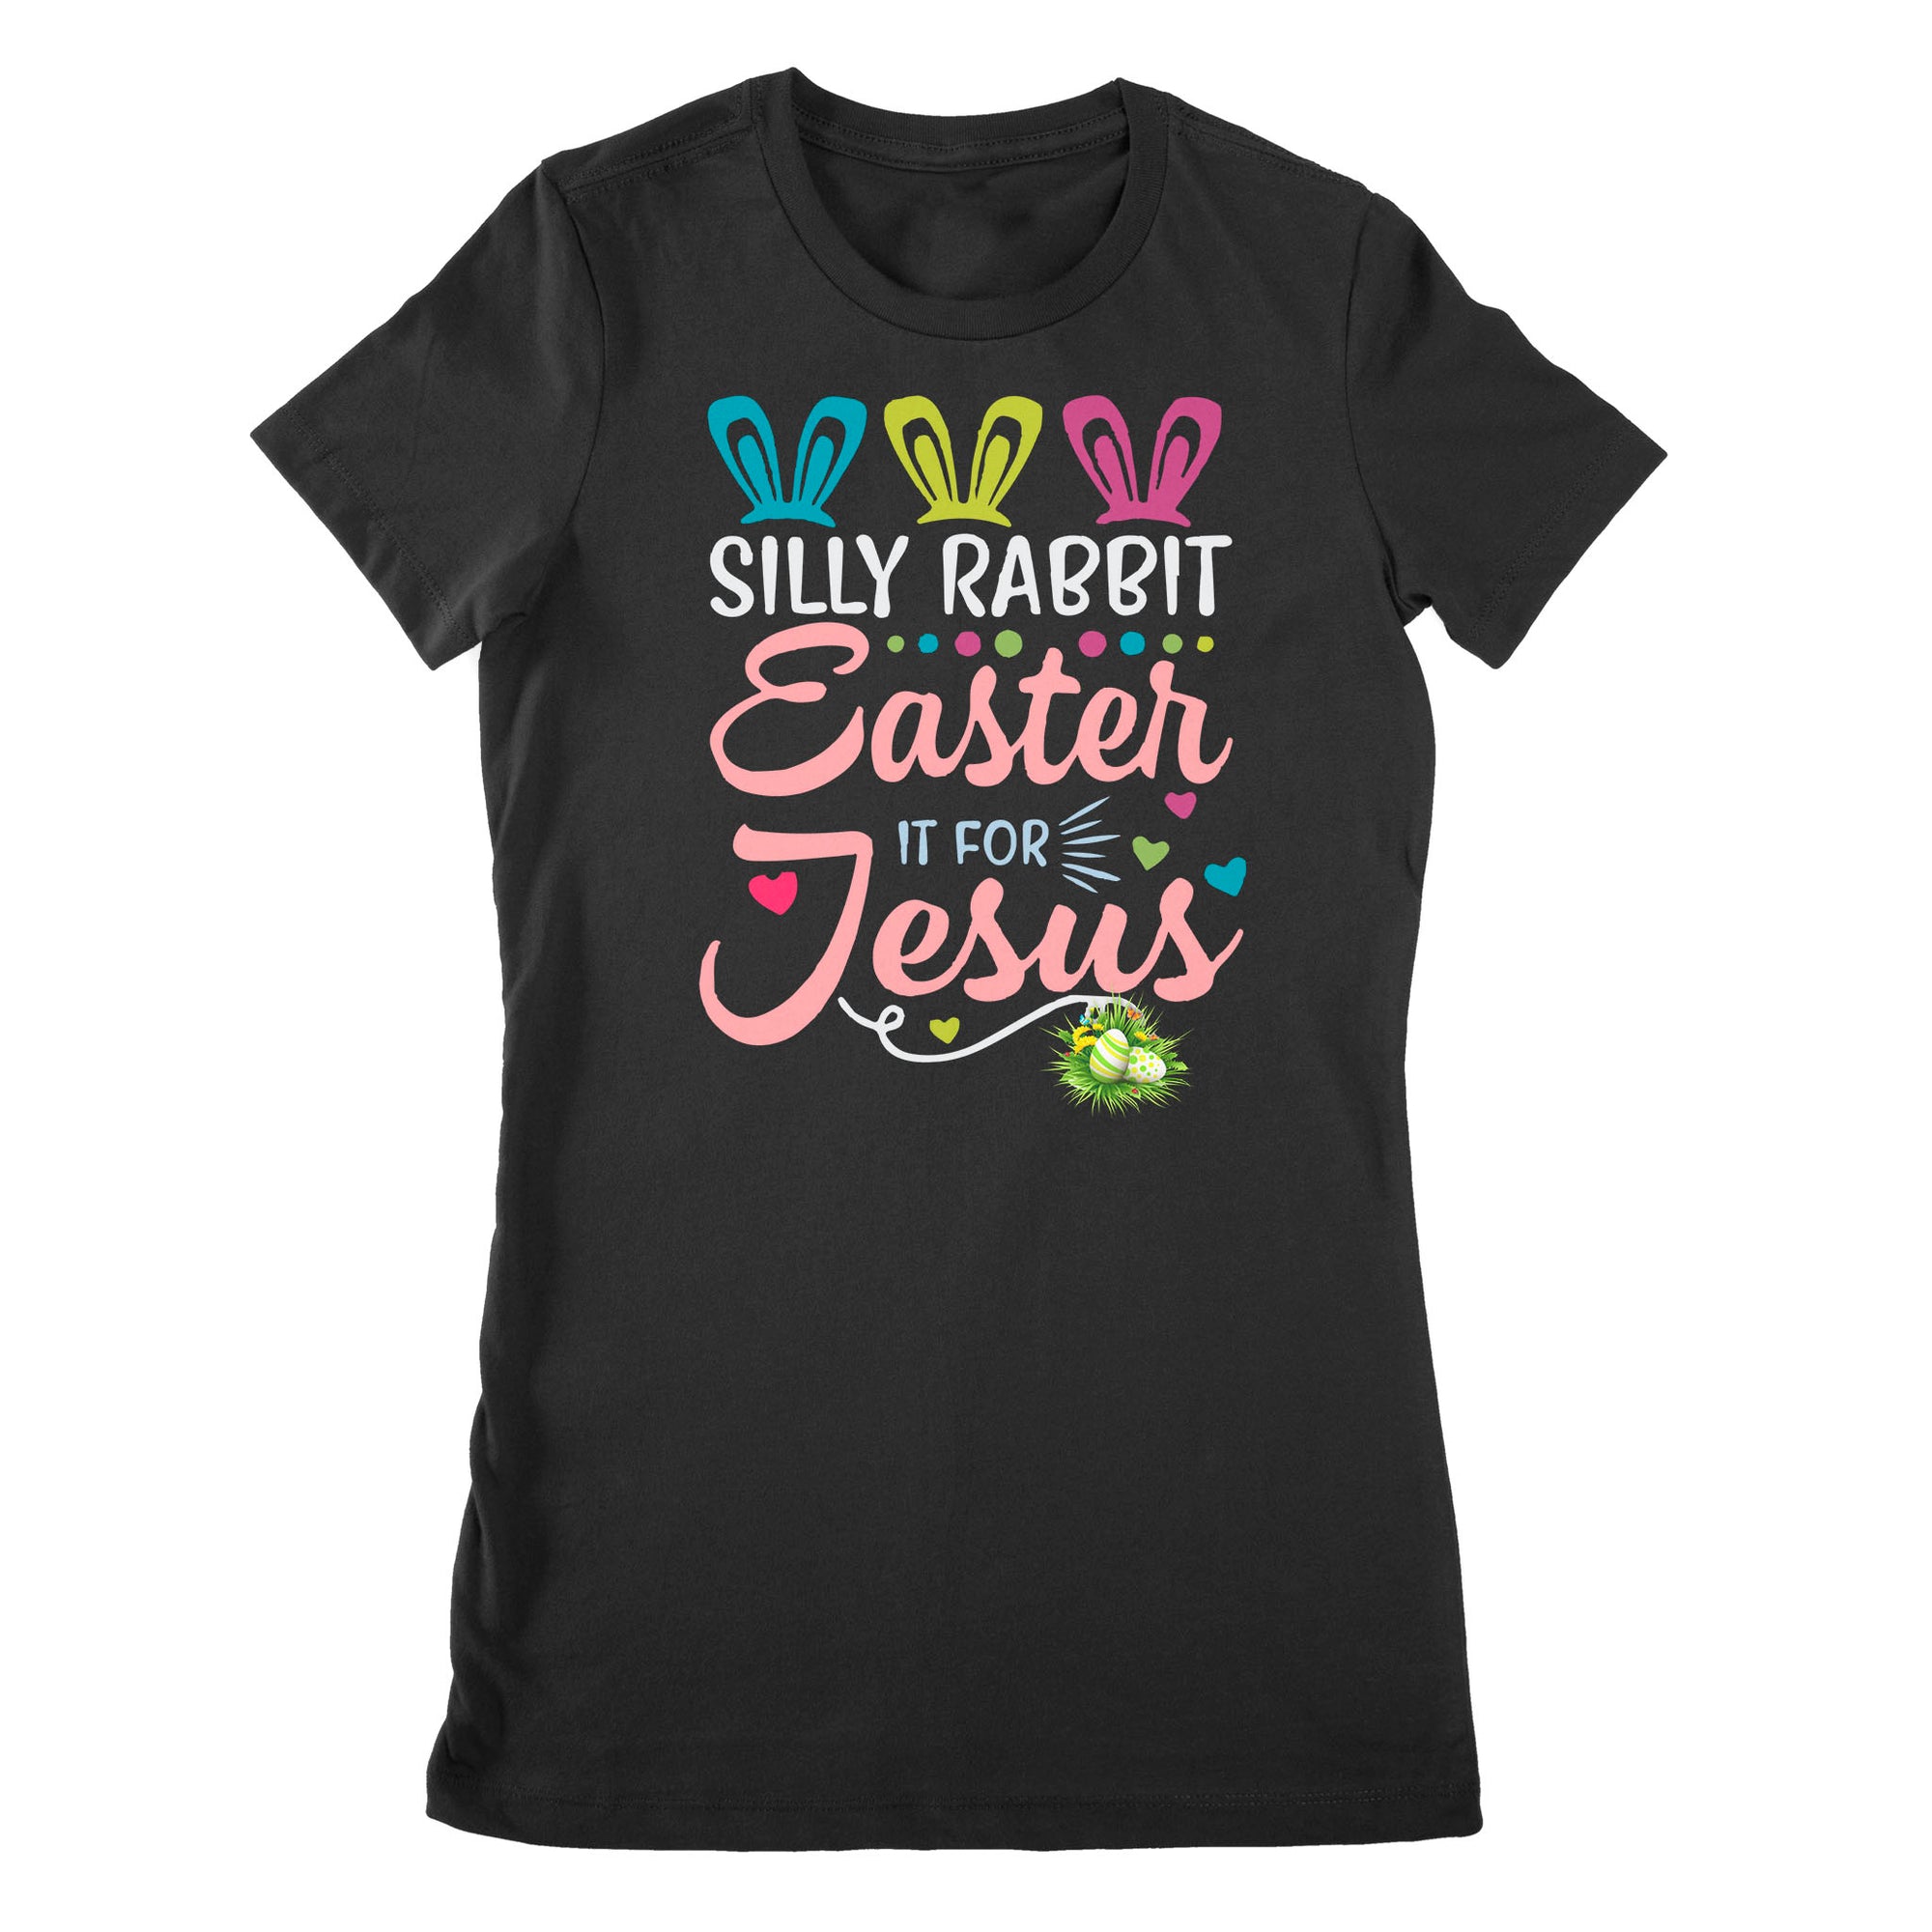 Premium Women's T-shirt - Silly Rabbit Easter Is For Jesus Christians Cross Bunny Easter Eggs Cute